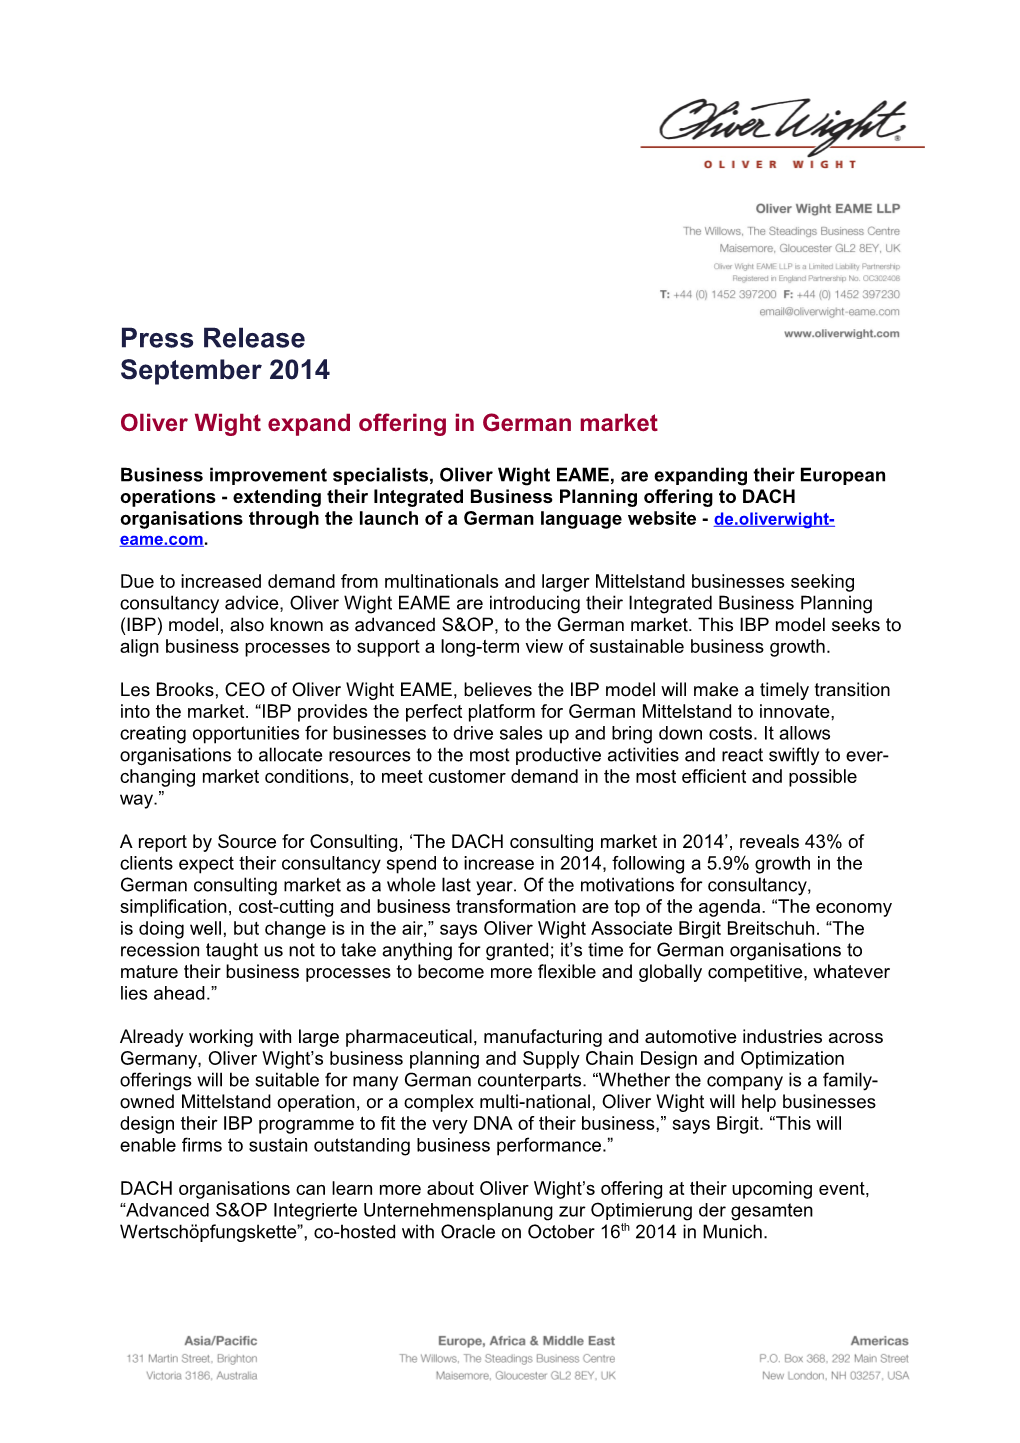 Oliver Wight Expand Offering in German Market